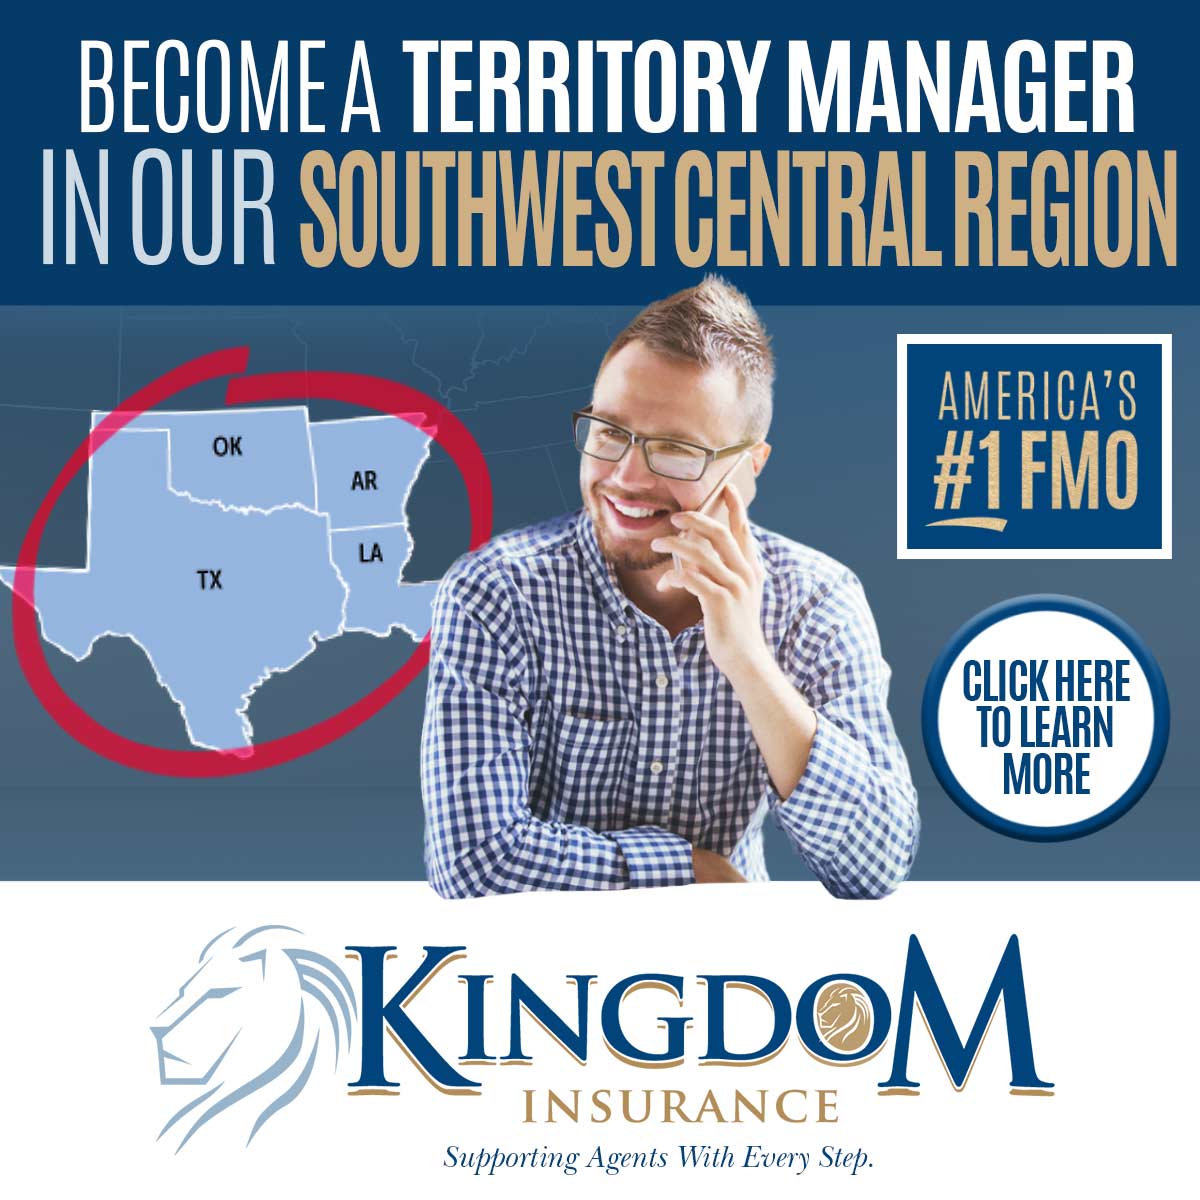 Become a Territory Manager in our Southwest Central Region. American's #1 FMO. Click here to learn more. Kingdom Insurance. Supporting agents with every step.